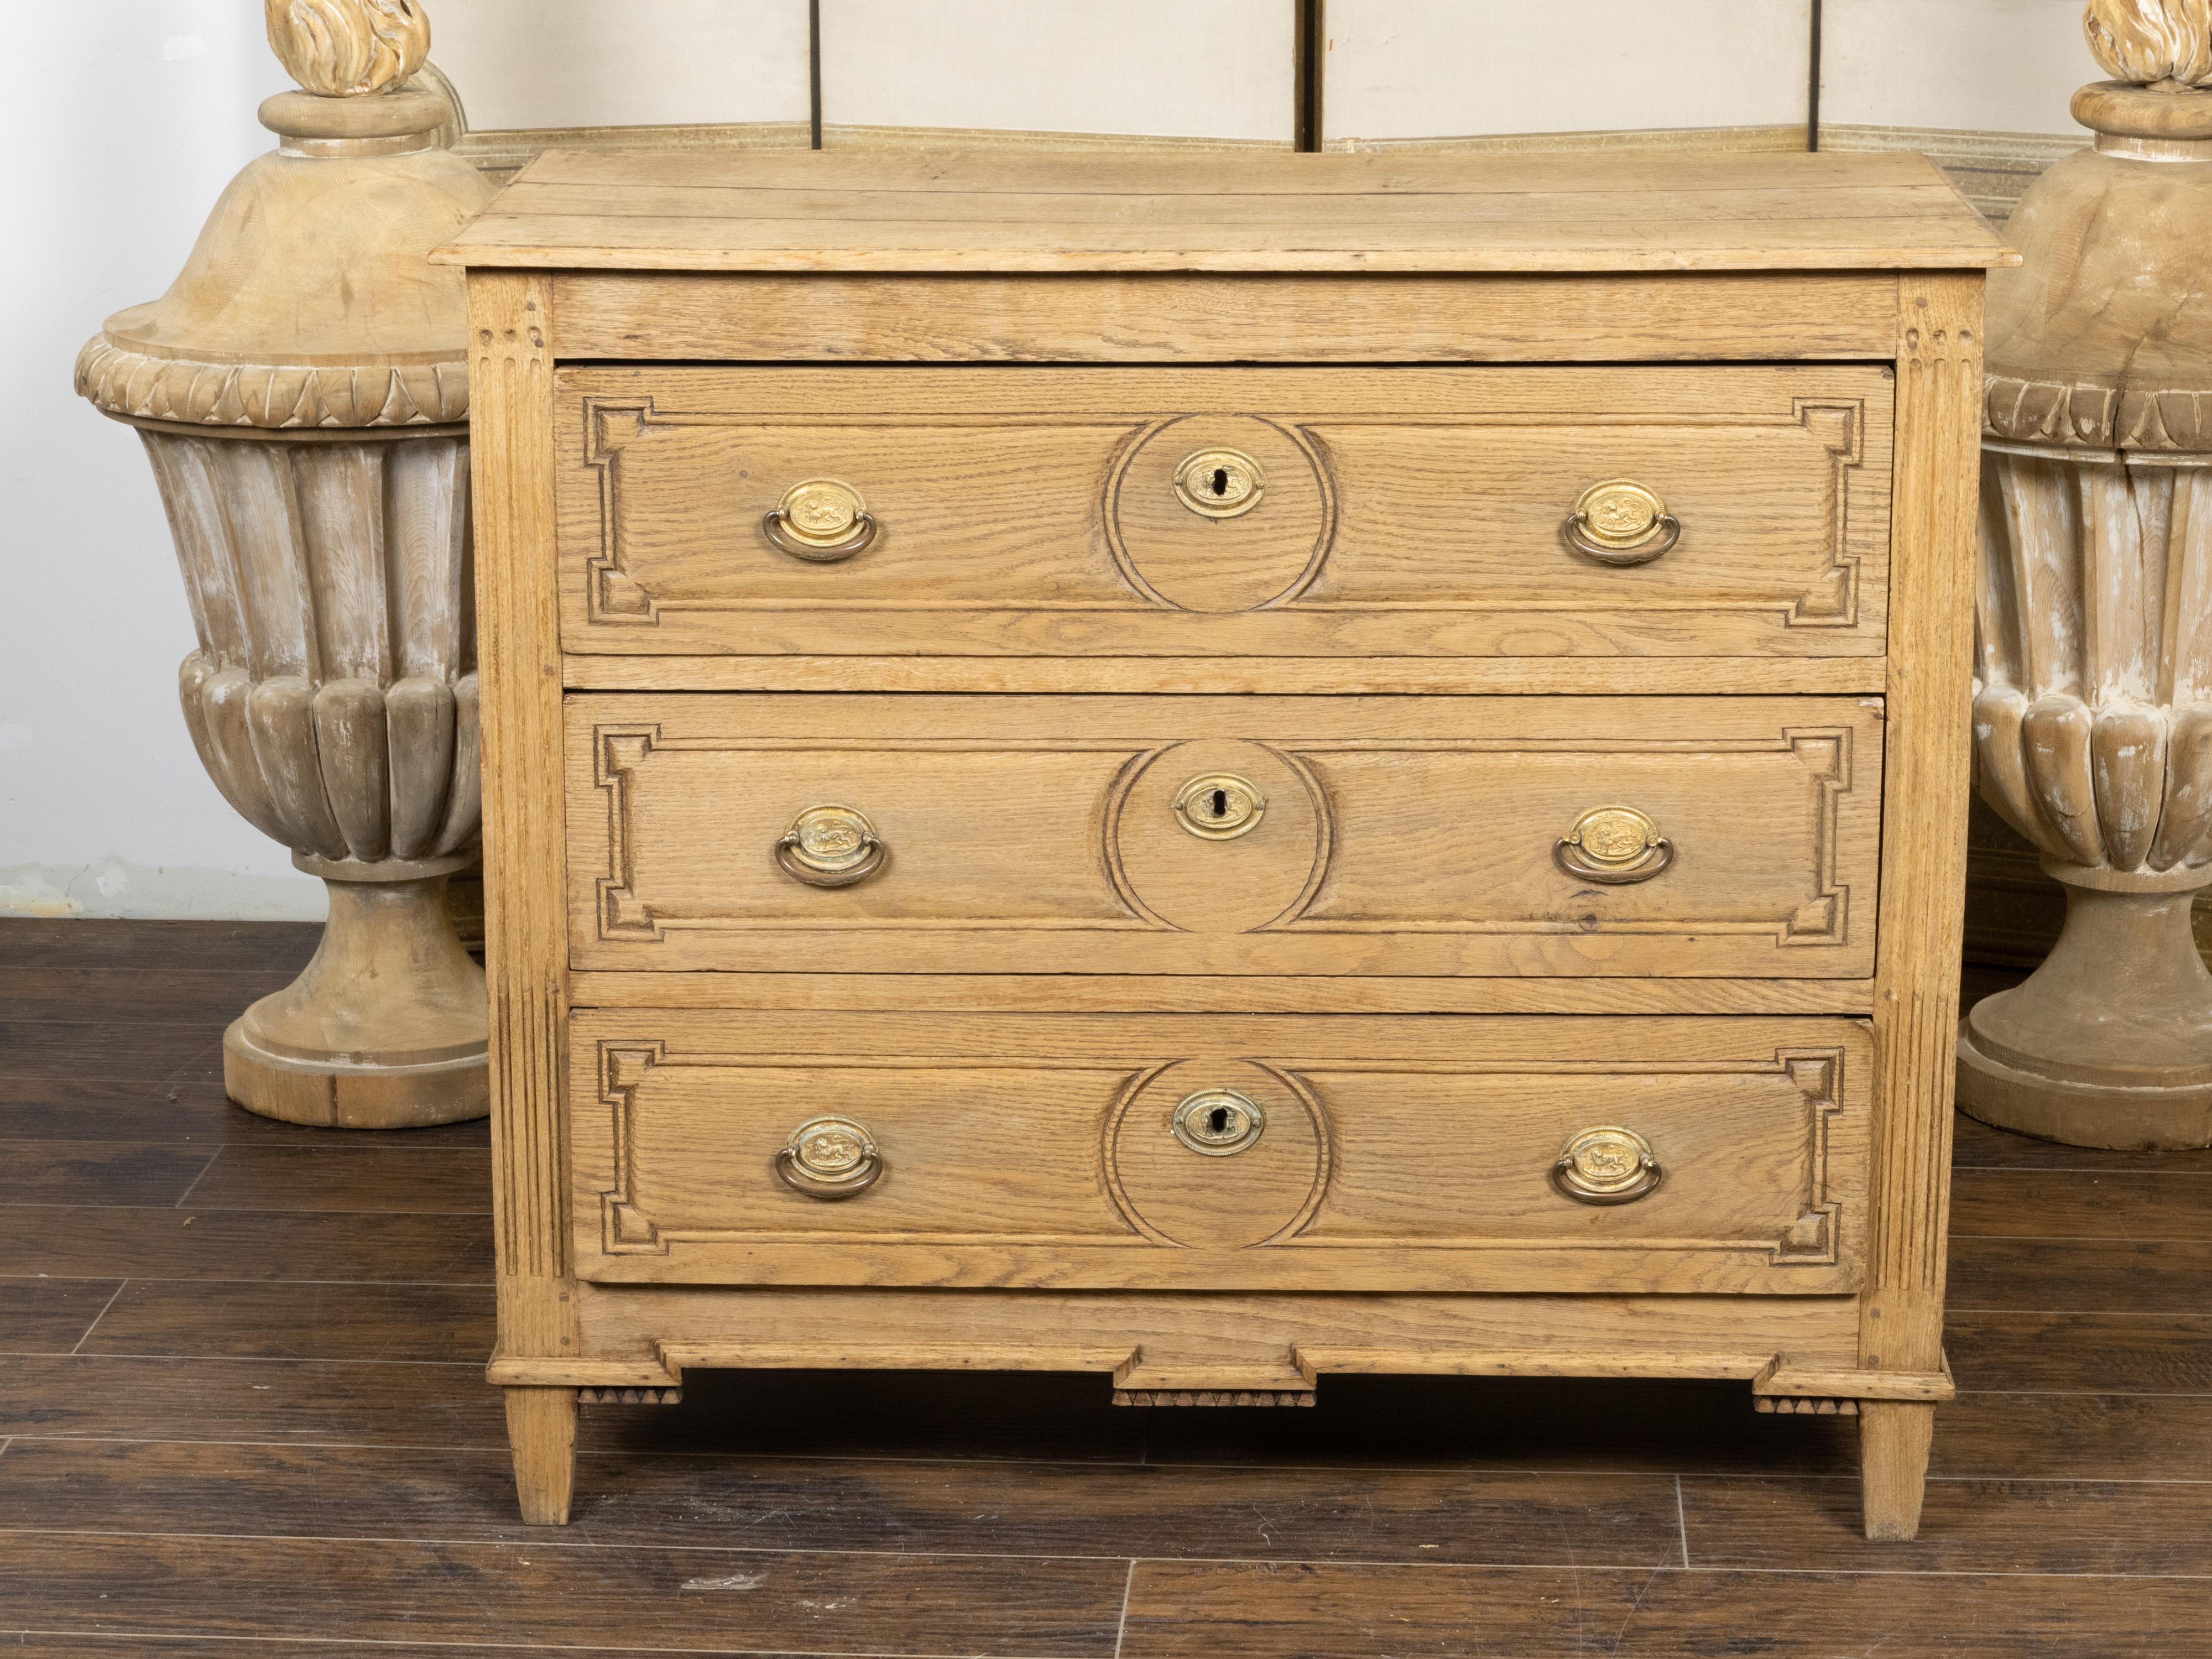 A French Louis XVI style bleached oak chest from the 19th century, with three drawers, carved panels, brass hardware and fluted side posts. Created in France during the 19th century, this bleached oak chest showcases the stylistic characteristics of